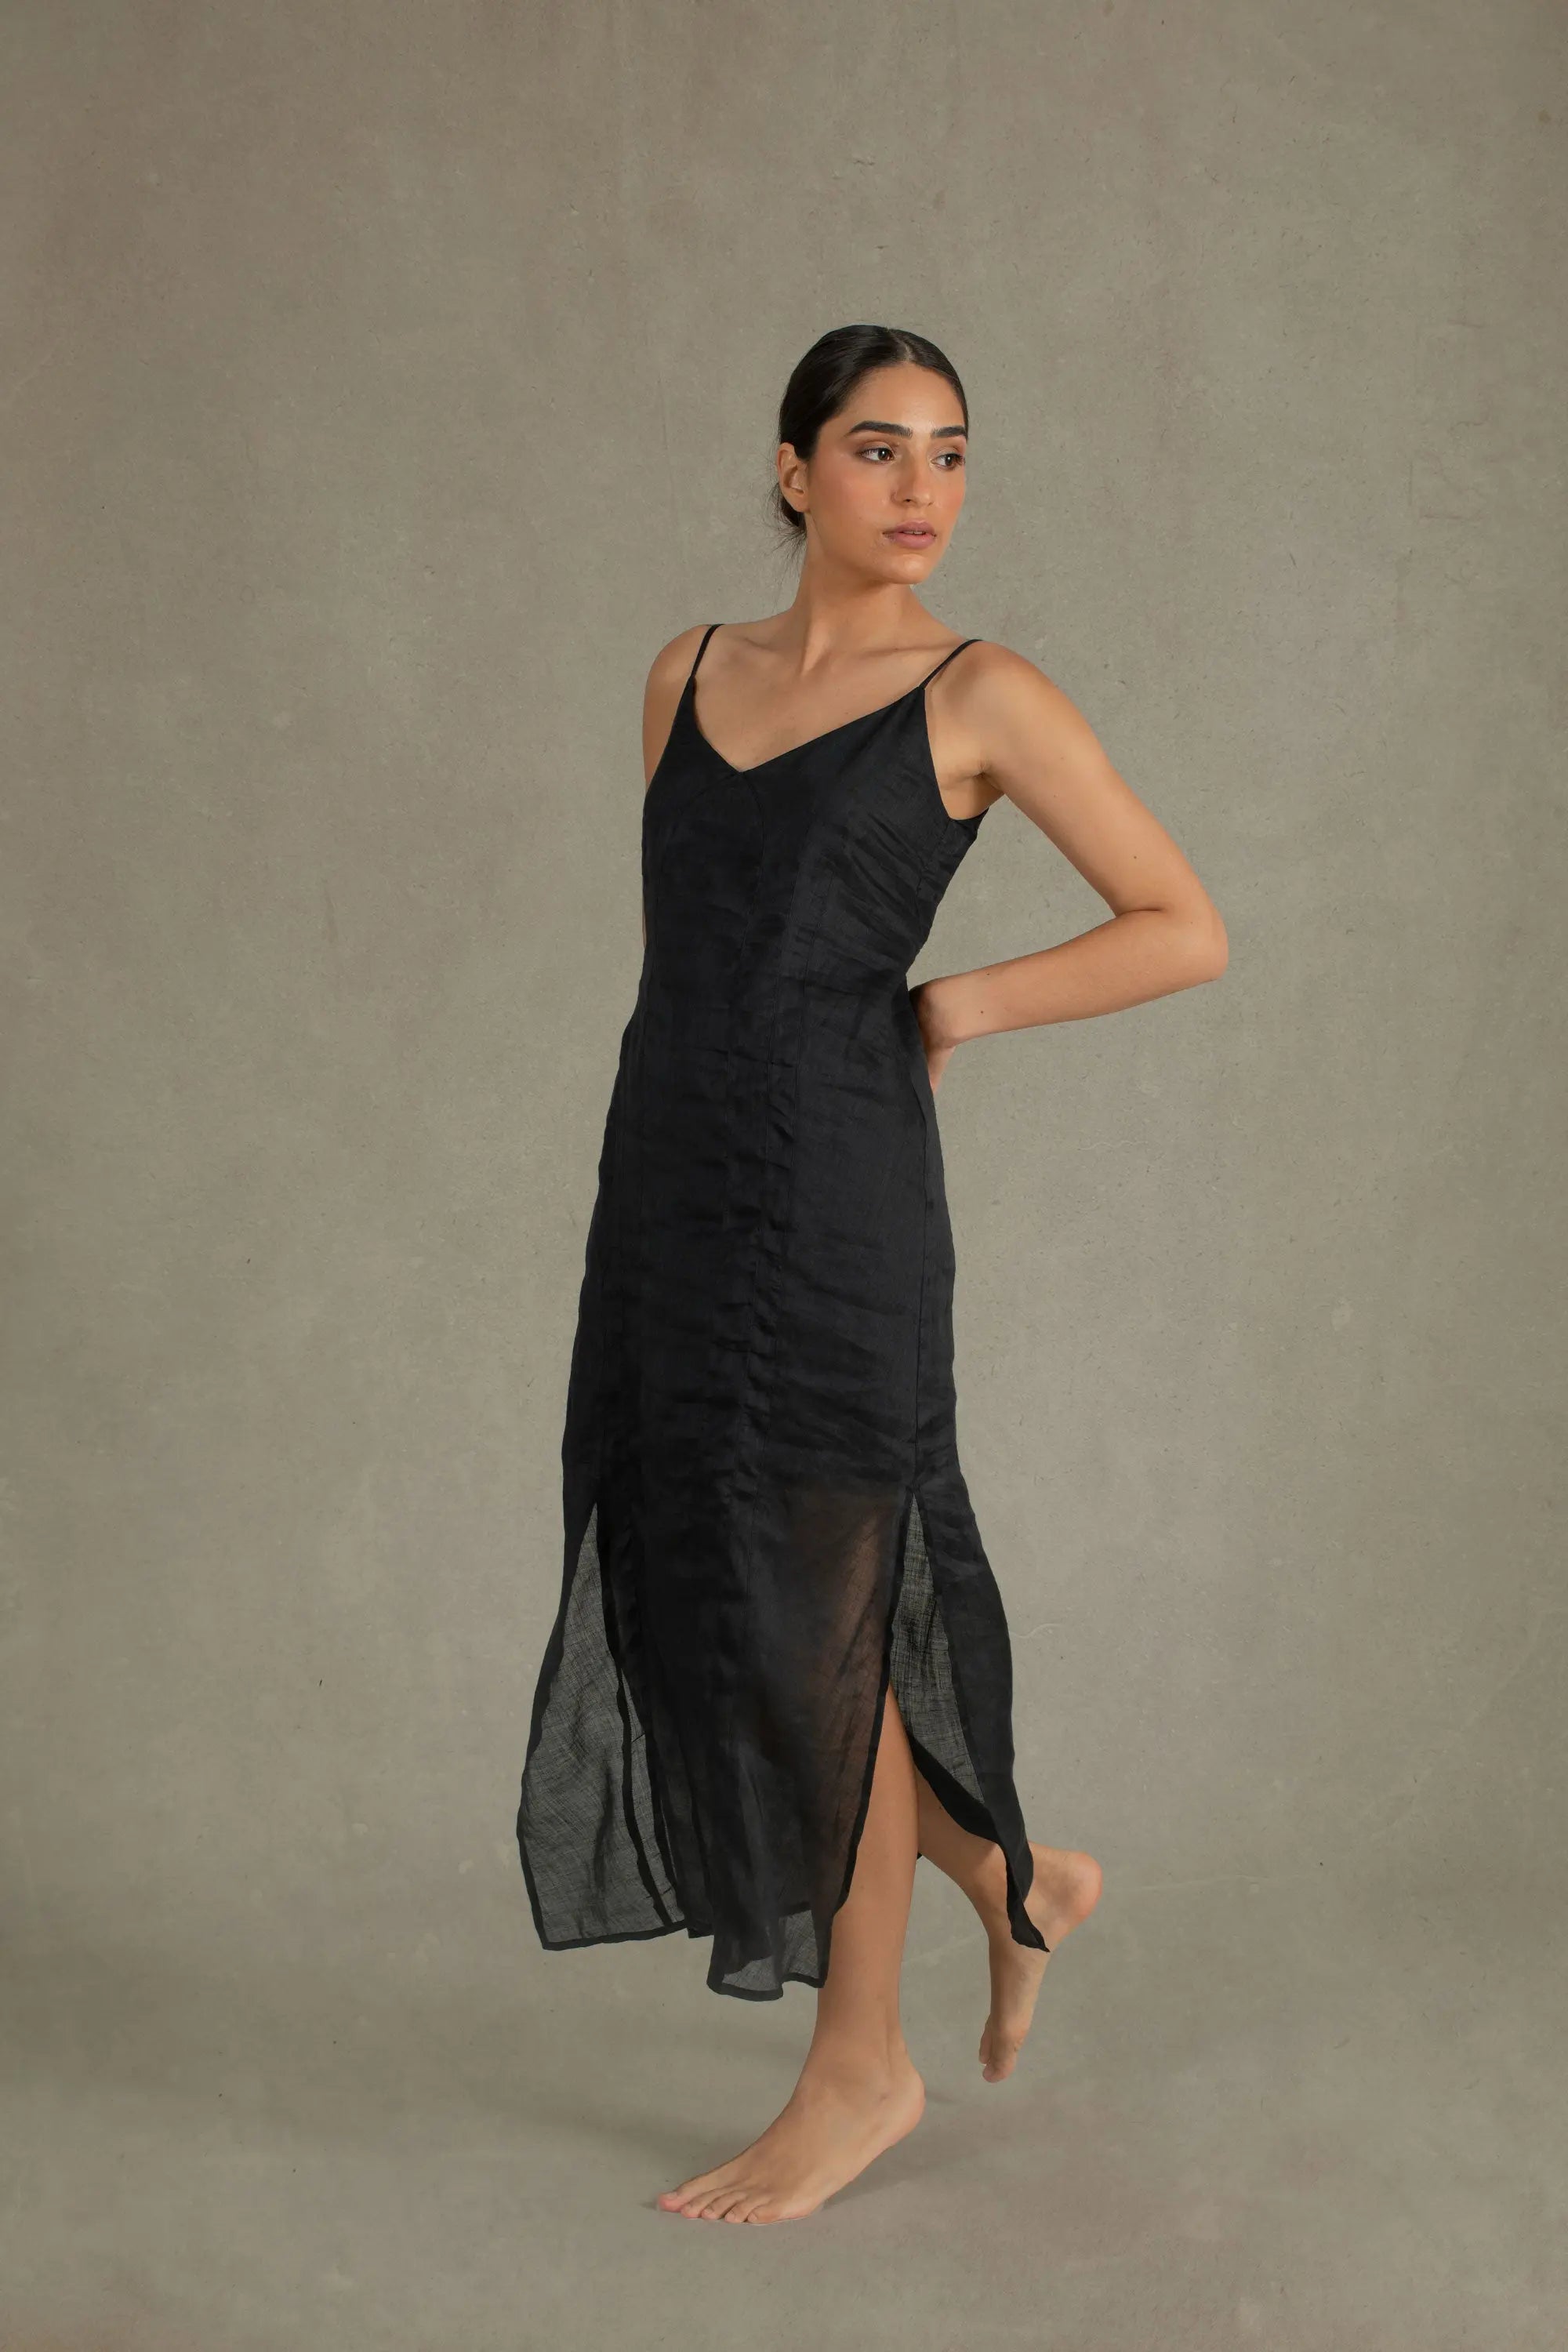 Dara Dress Reversible Black-to-silver Sequin Wrap Dress Loralai Pants  Featuring Embroidery From the Sindhi Region 